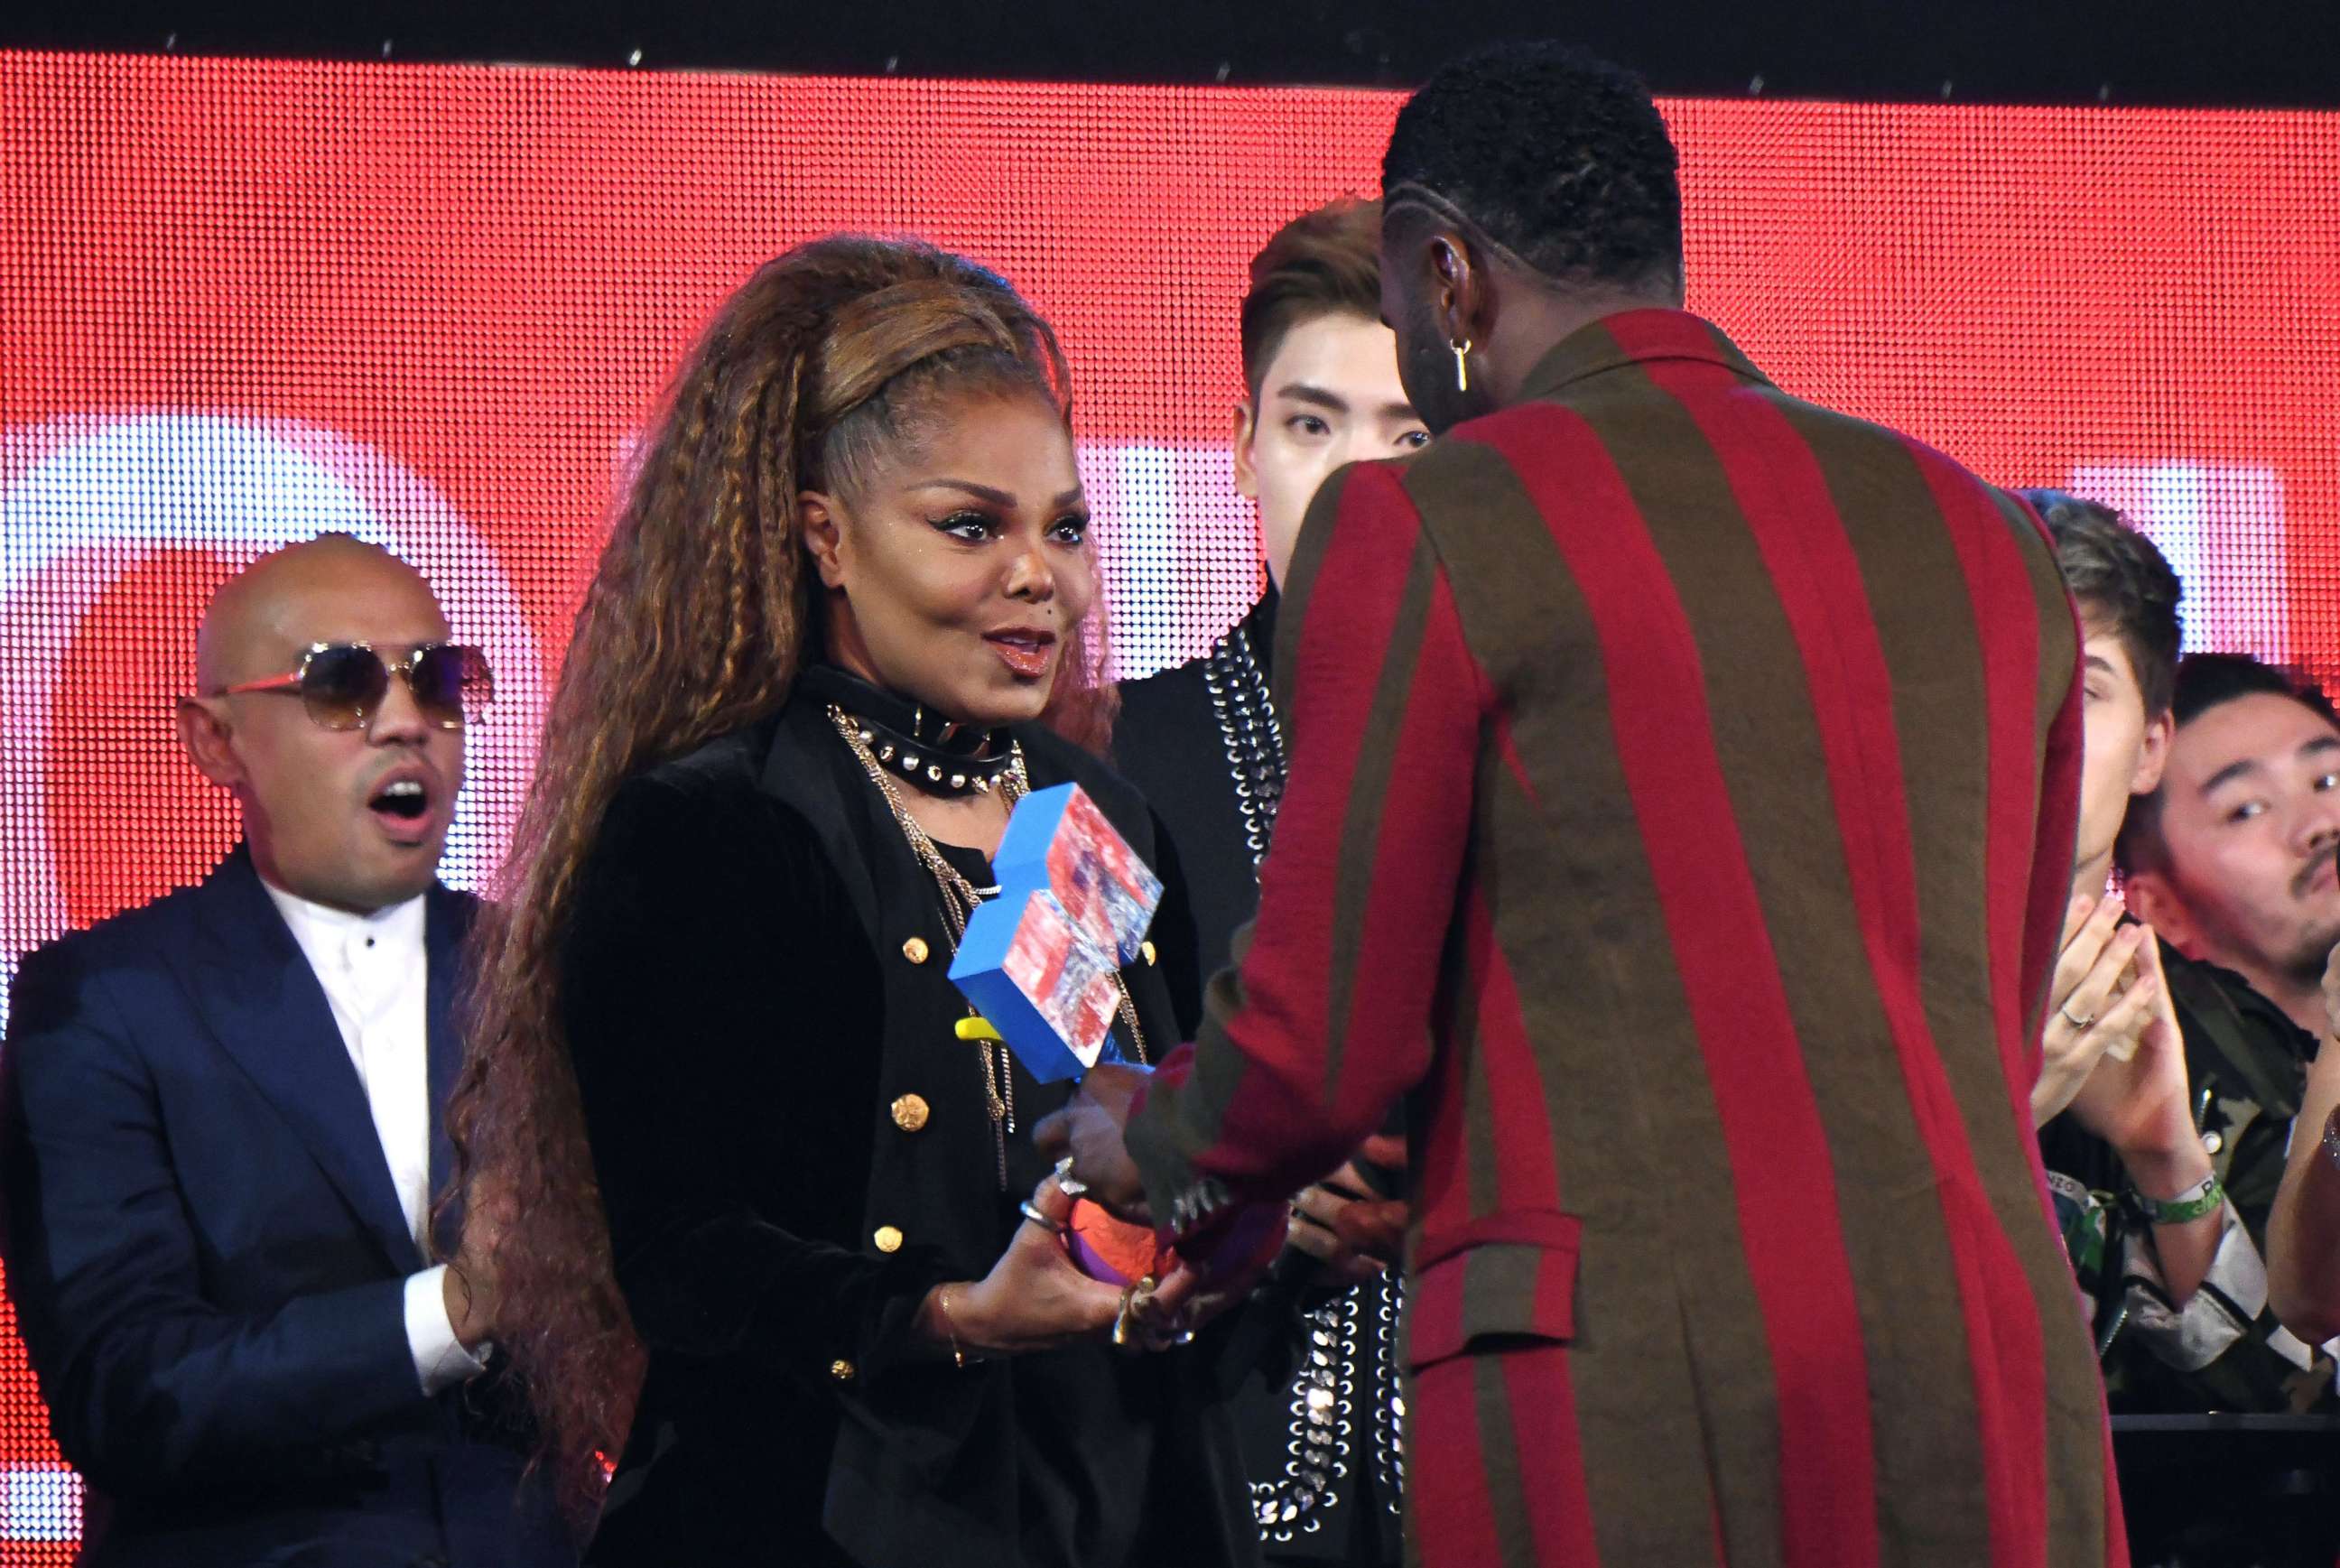 PHOTO: Singer Janet Jackson receives the 2018 Global Icon Award during the 2018 MTV Europe Music Awards held at Bilbao Exhibition Centre, in Bilbao, Spain, Nov. 4, 2018.